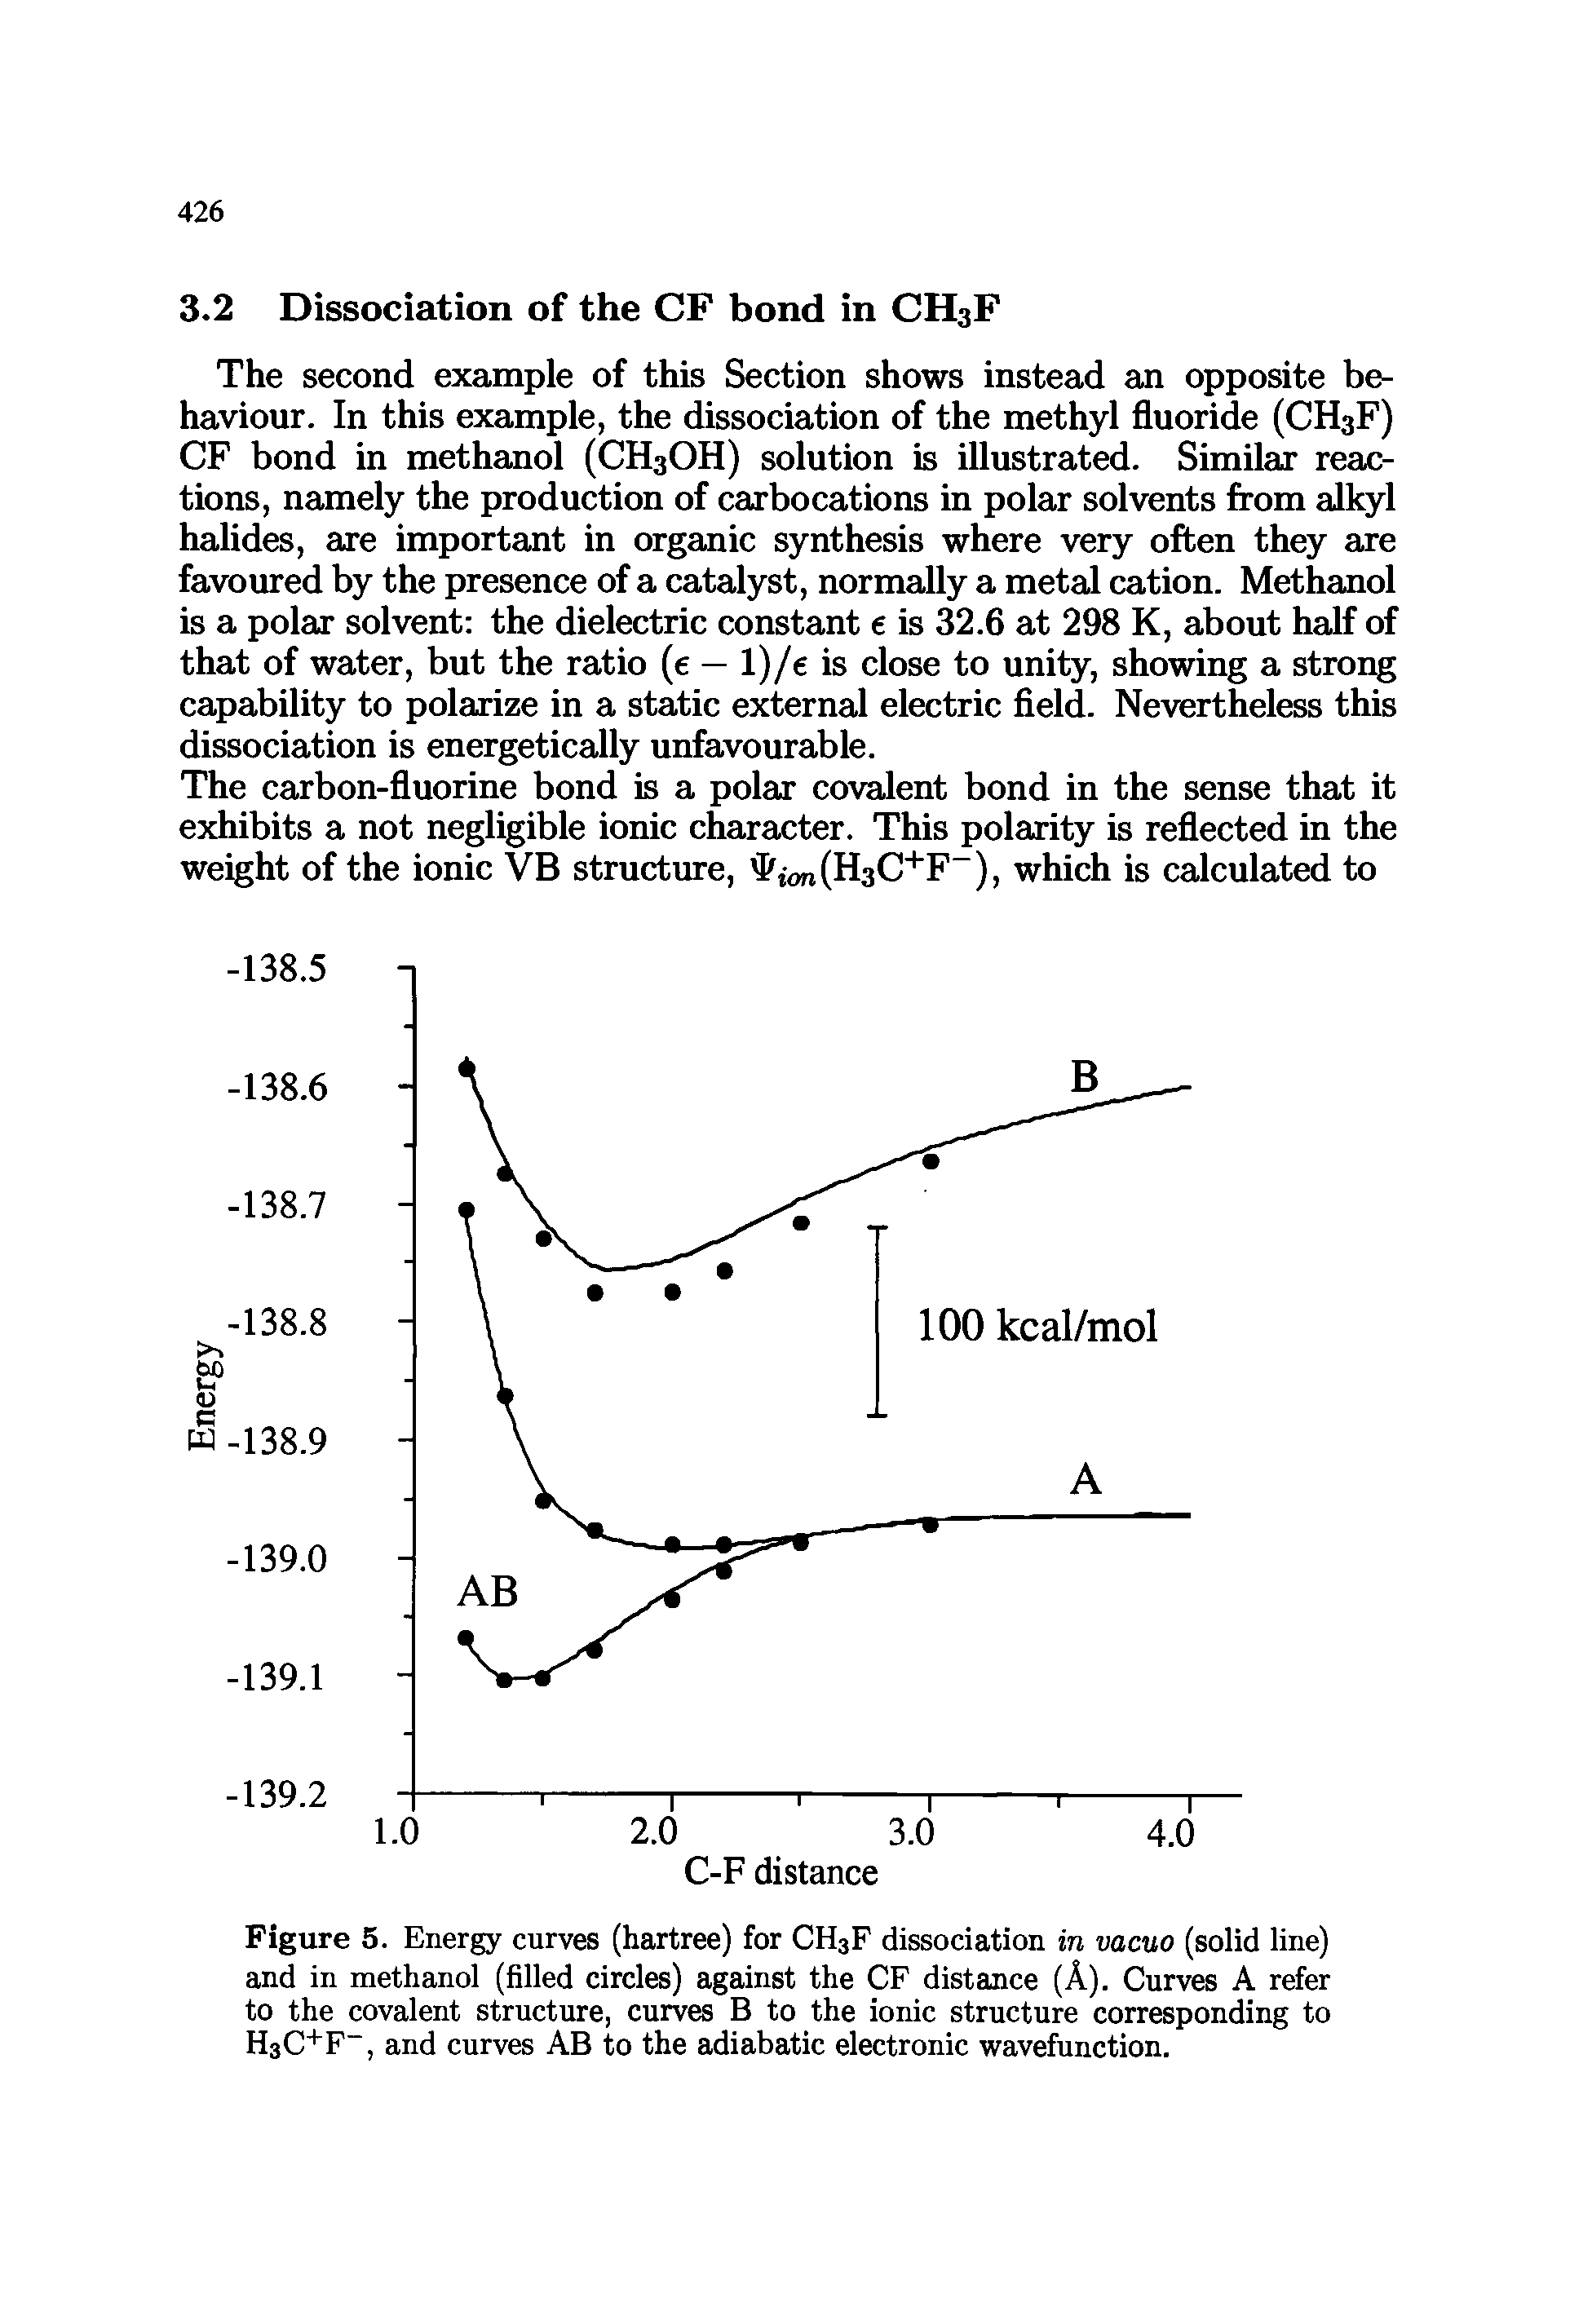 Figure 5. Energy curves (hartree) for CH3F dissociation in vacuo (solid line) and in methanol (filled circles) against the CF distance (A). Curves A refer to the covalent structure, curves B to the ionic structure corresponding to HsC+F-, and curves AB to the adiabatic electronic wavefunction.